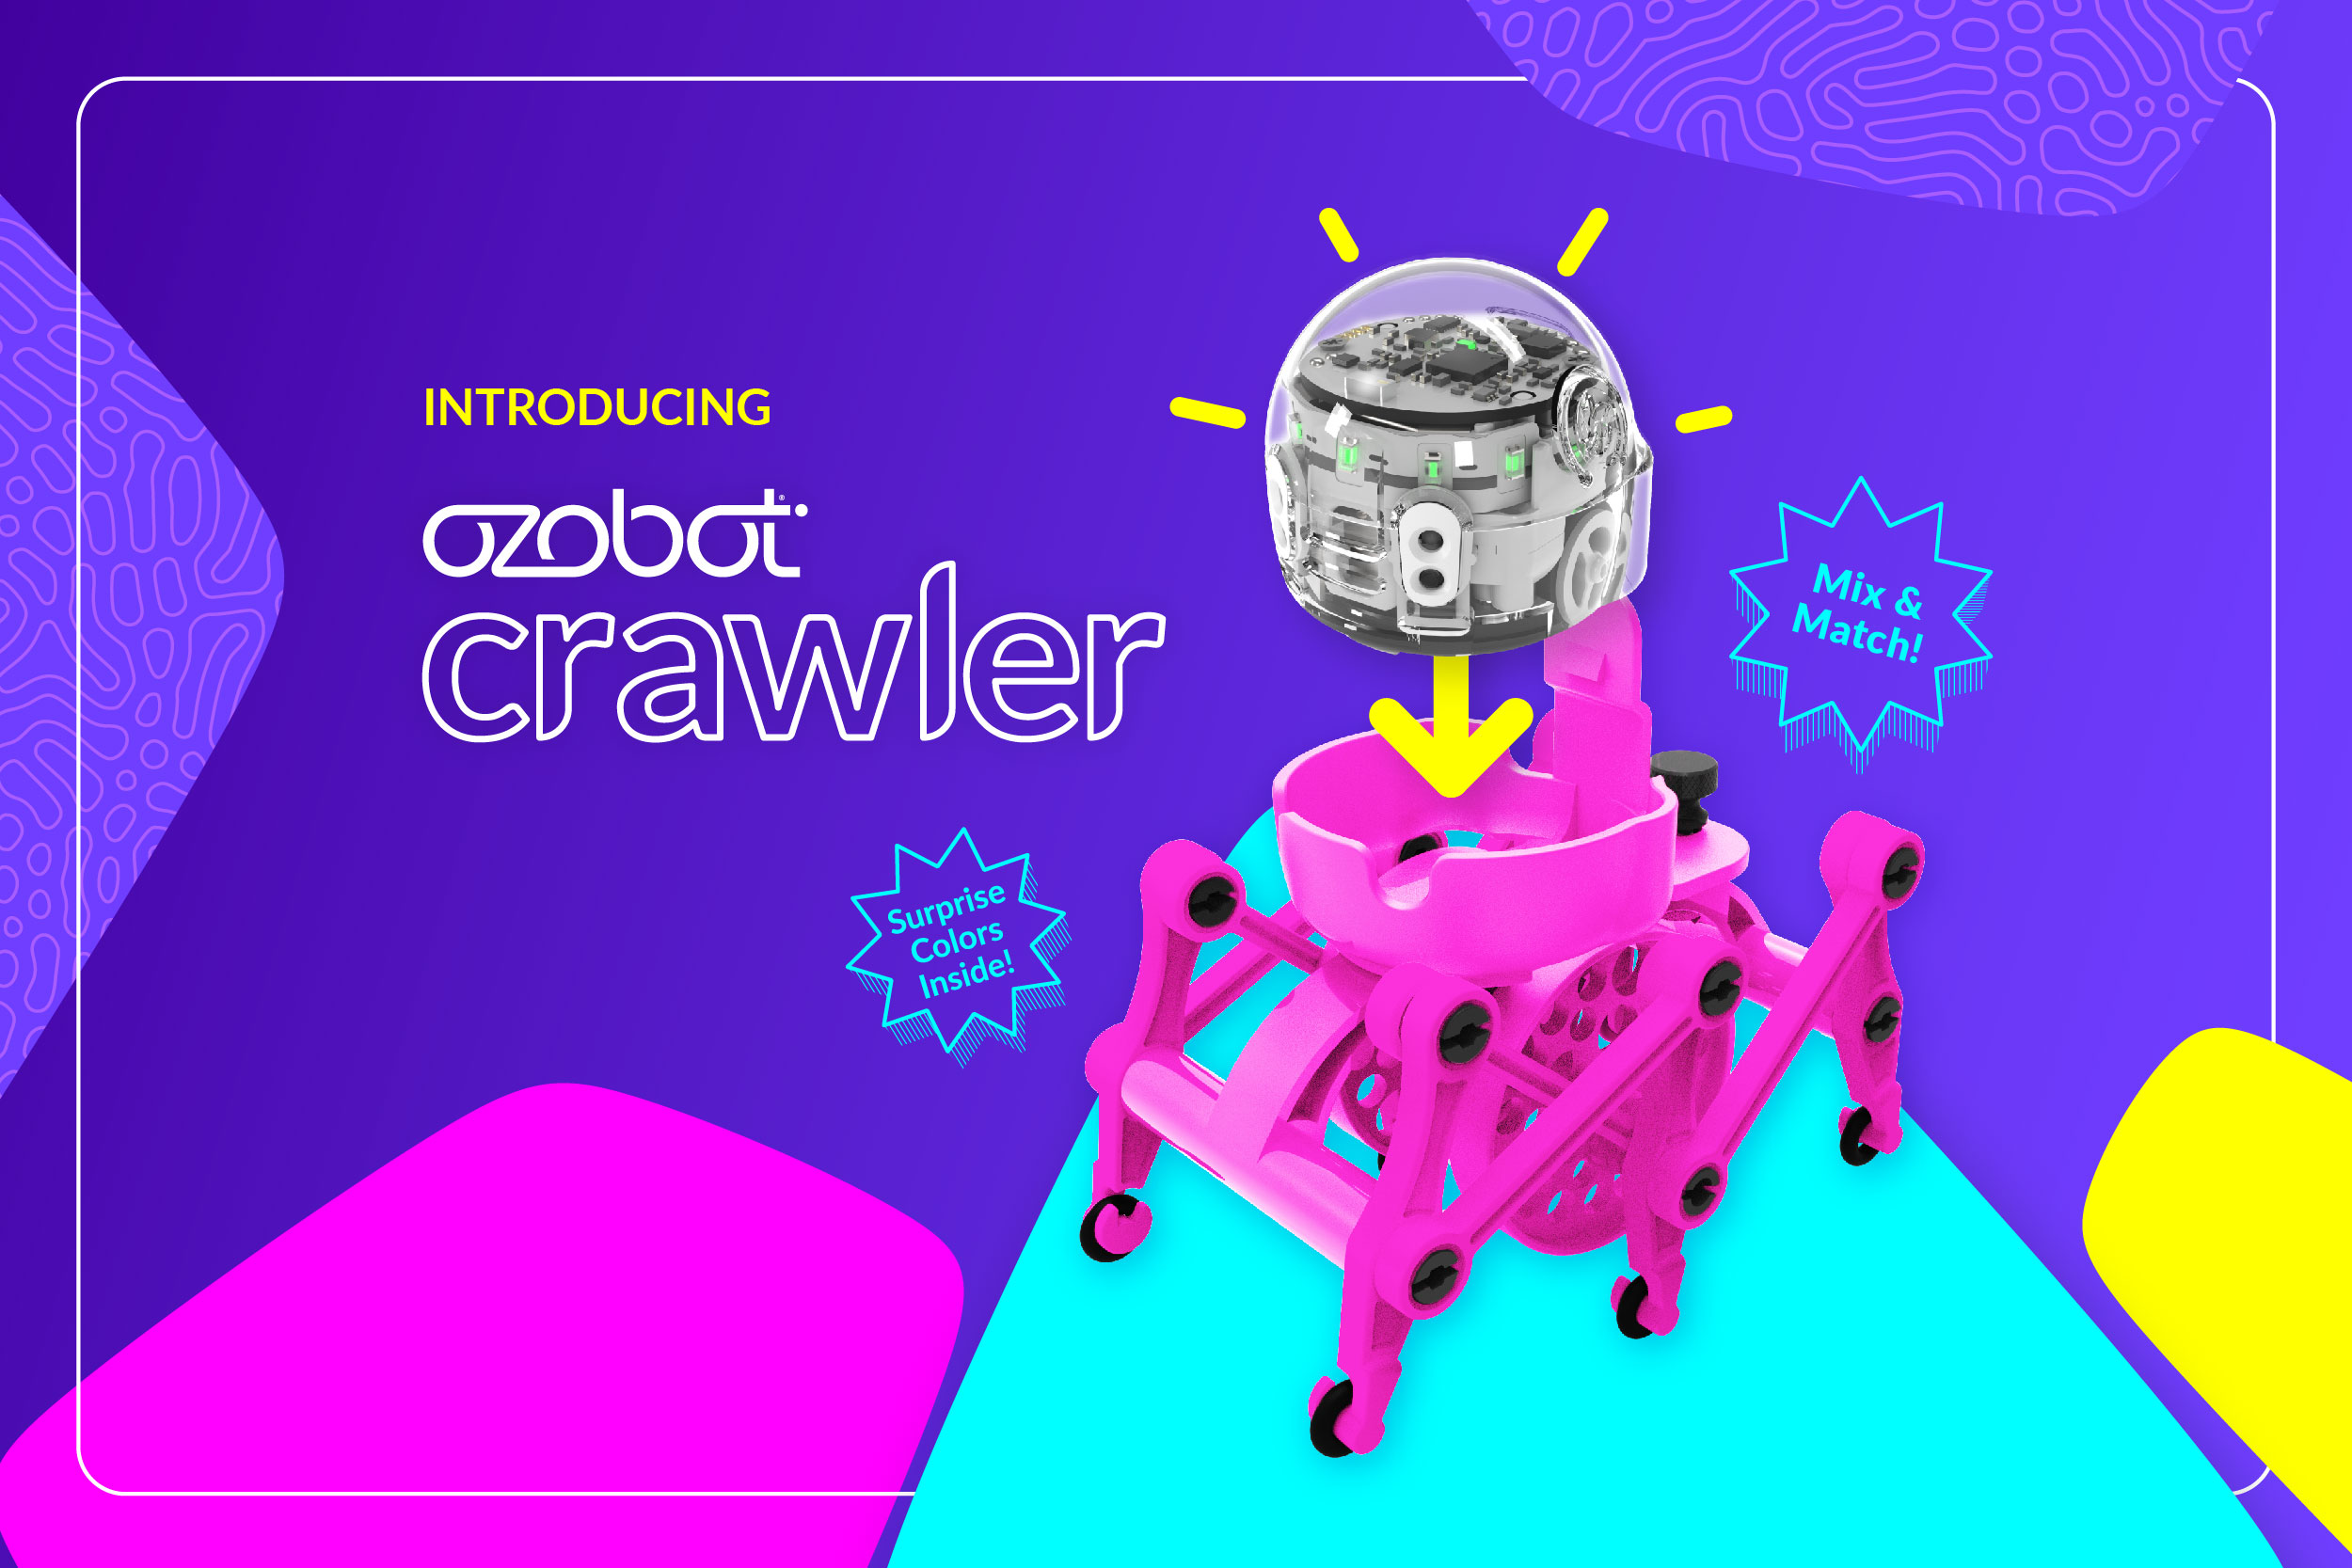 Explore with Evo using the new Ozobot Crawler